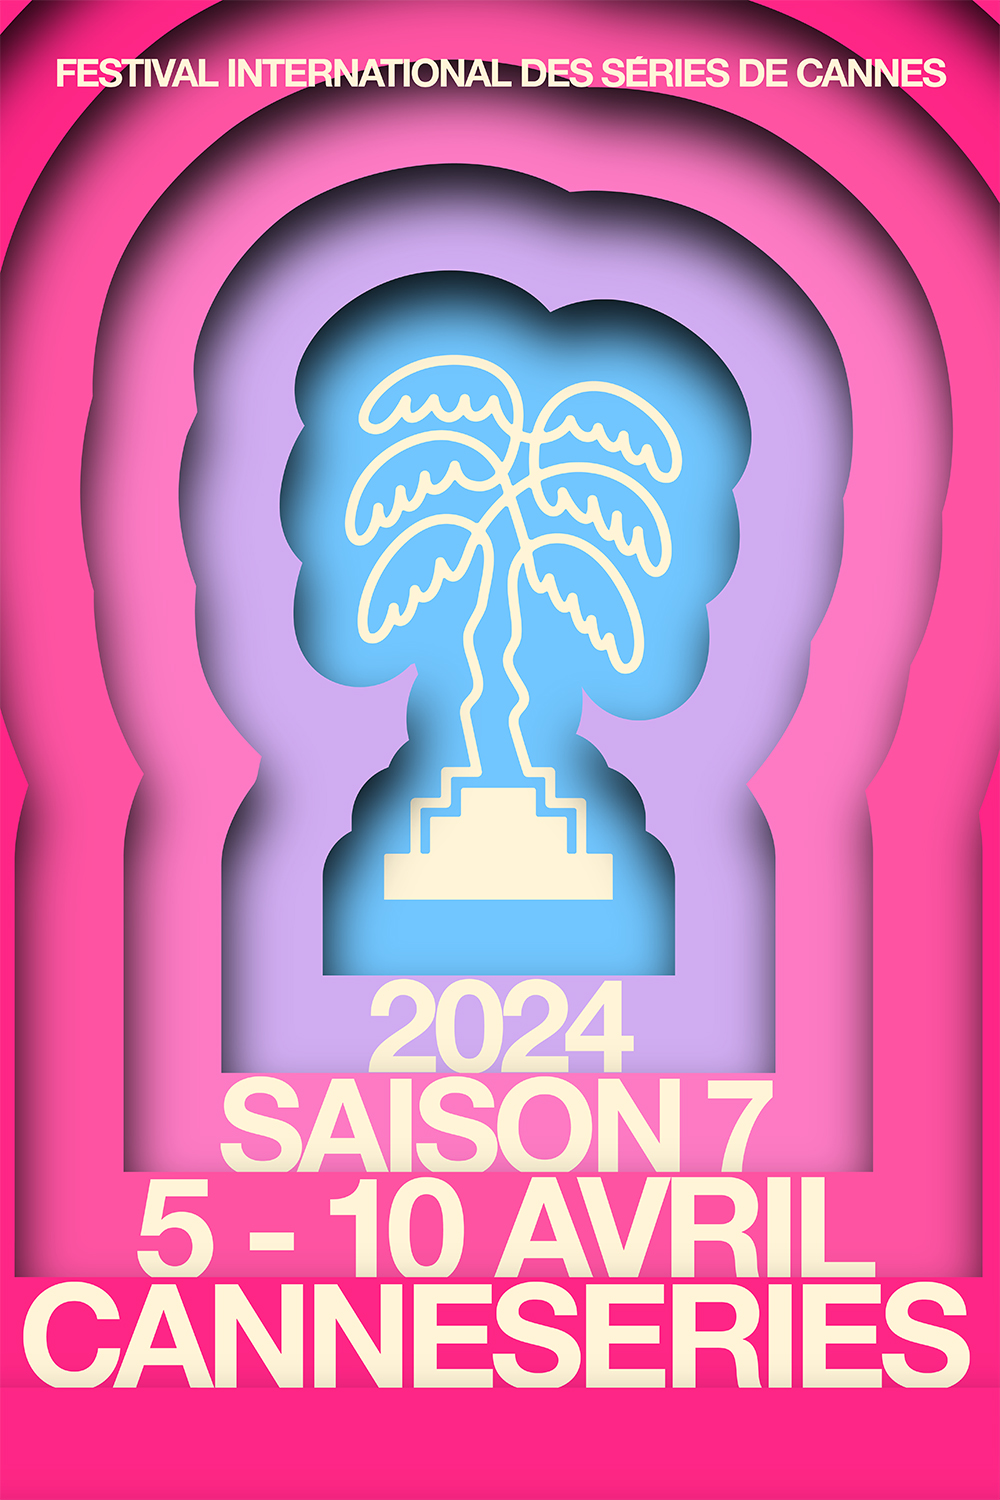 Nouvelle CANNESERIES 2024 Official Poster Revealed and Preparations